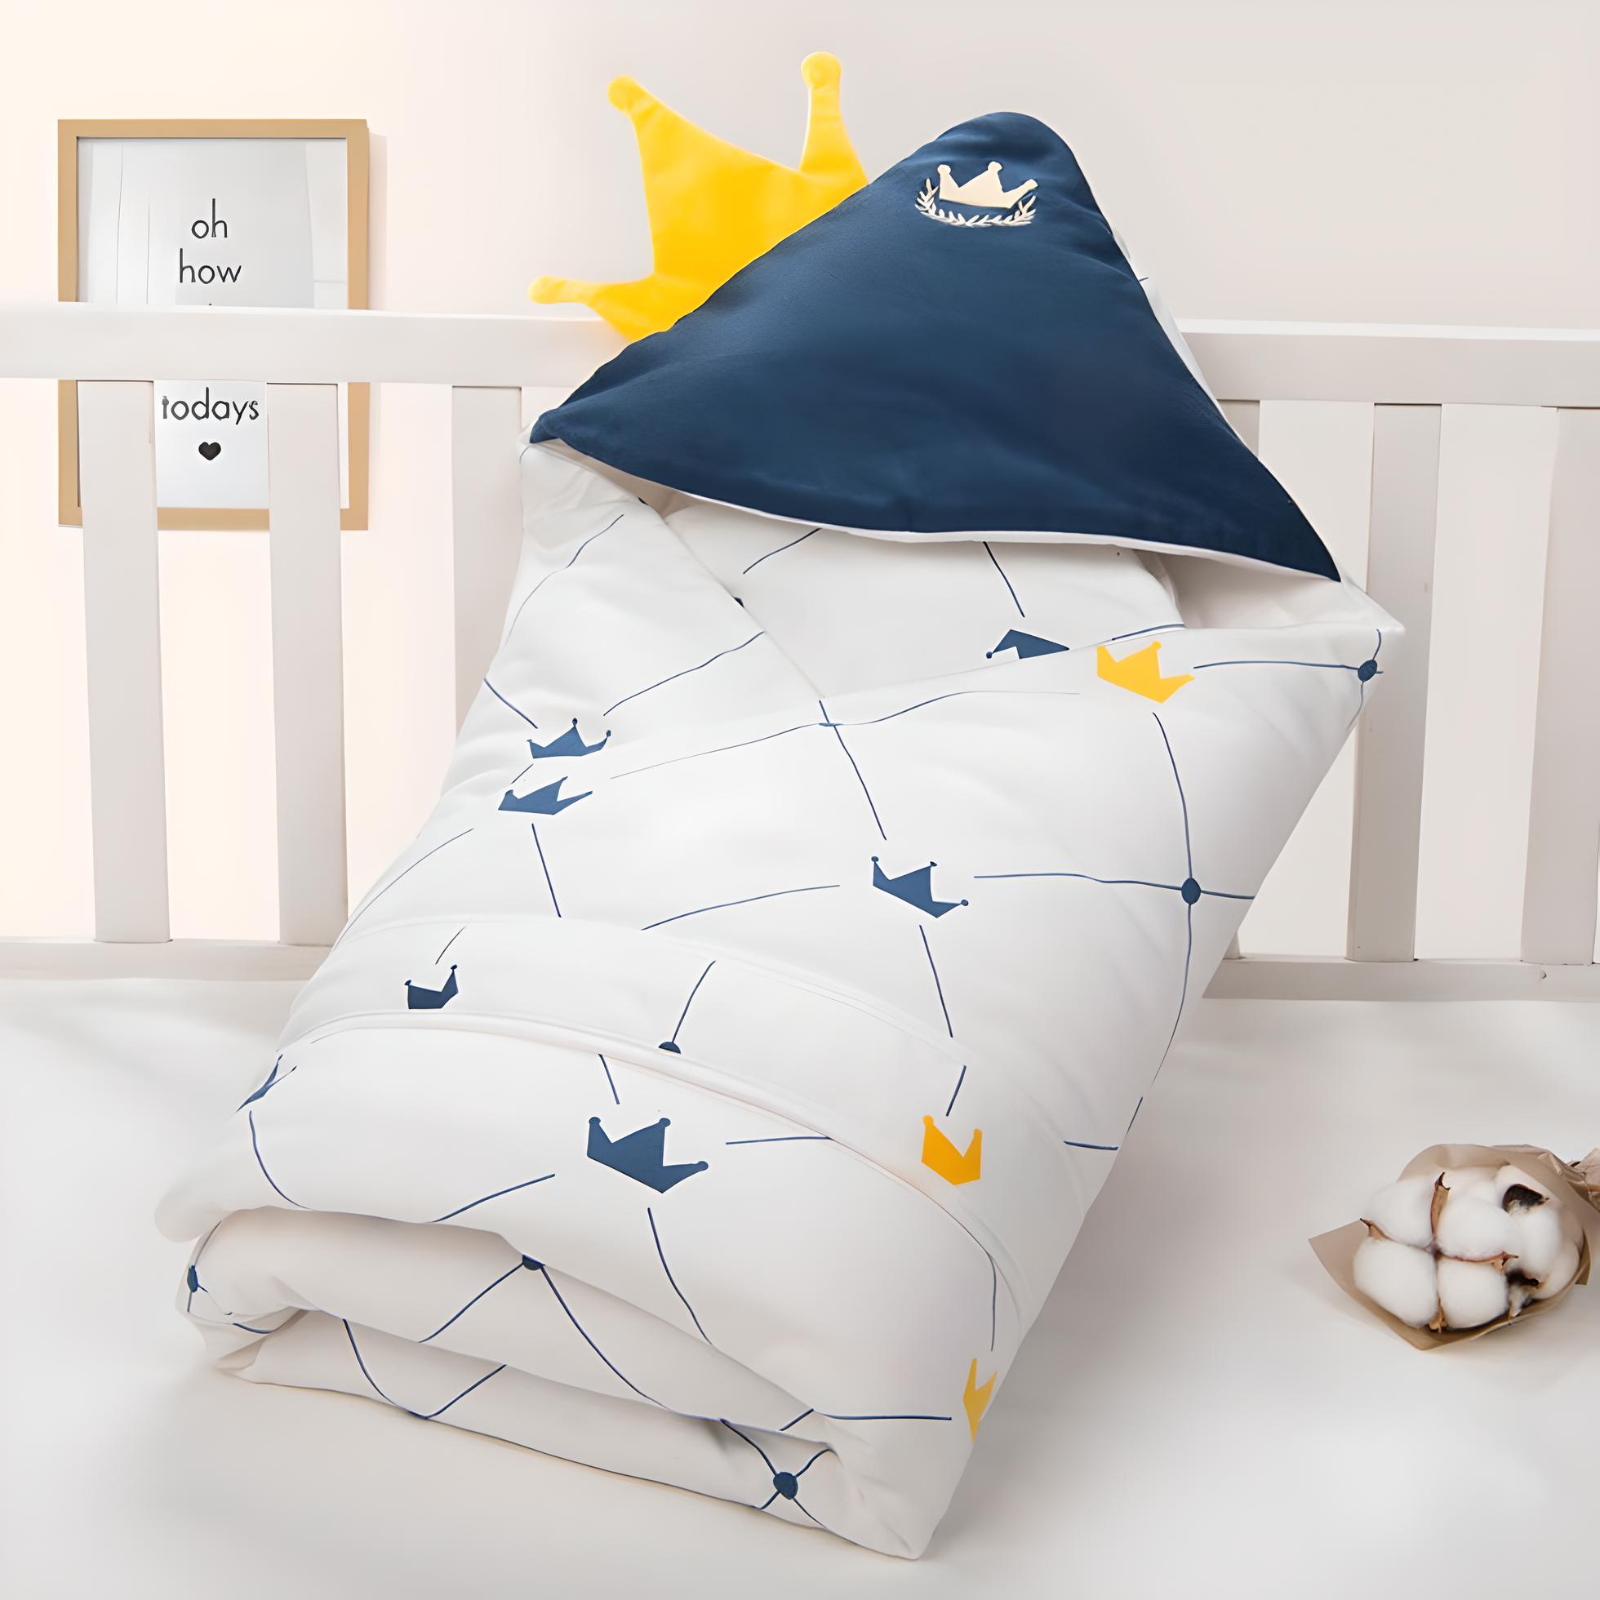 Premium Crown Baby Hooded Comforter / Swaddle Blanket I Newborn to 12 Months